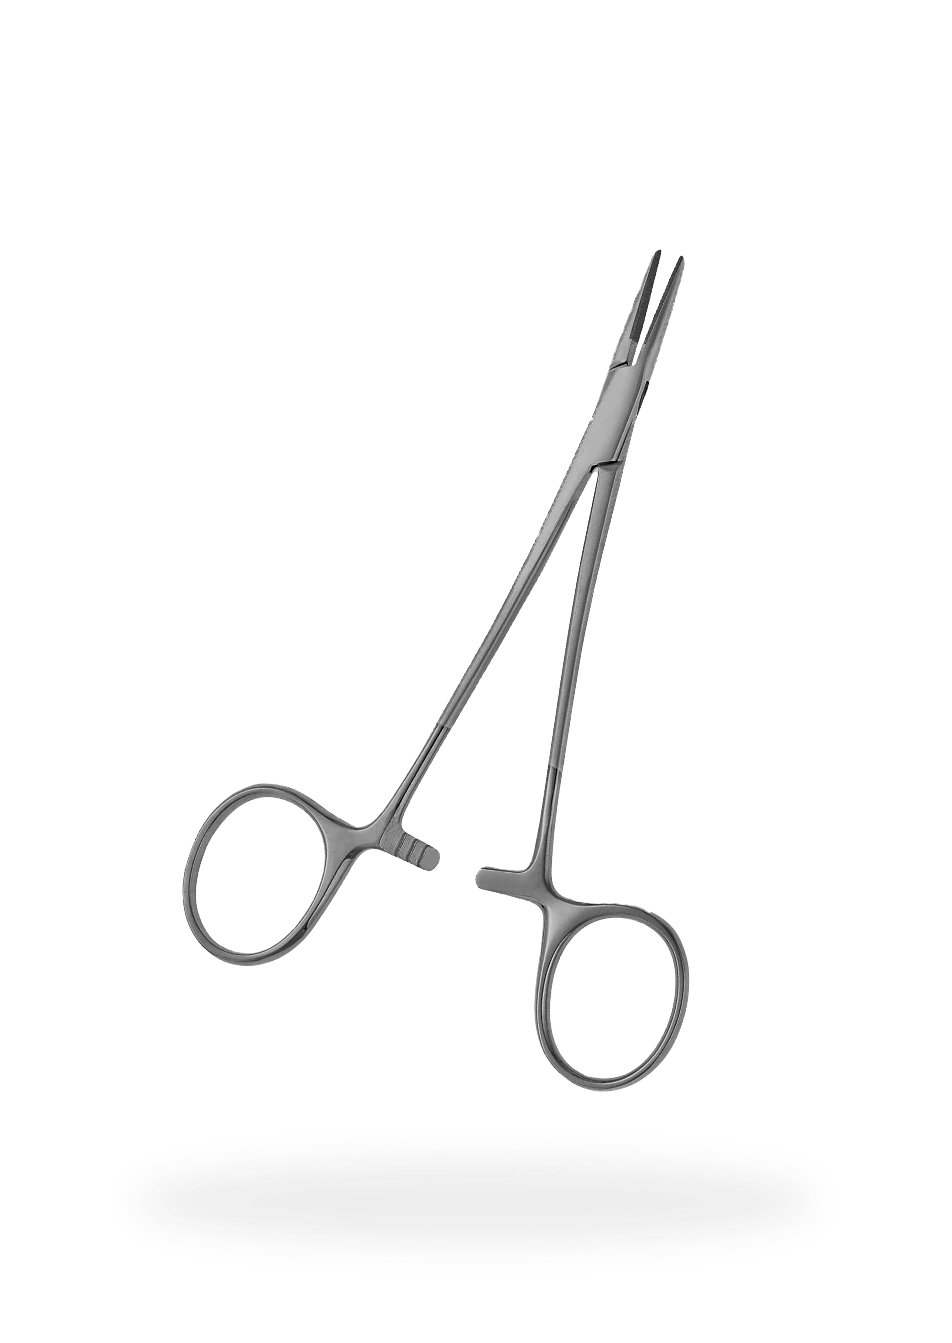 Scissors before fixing, worn and grey